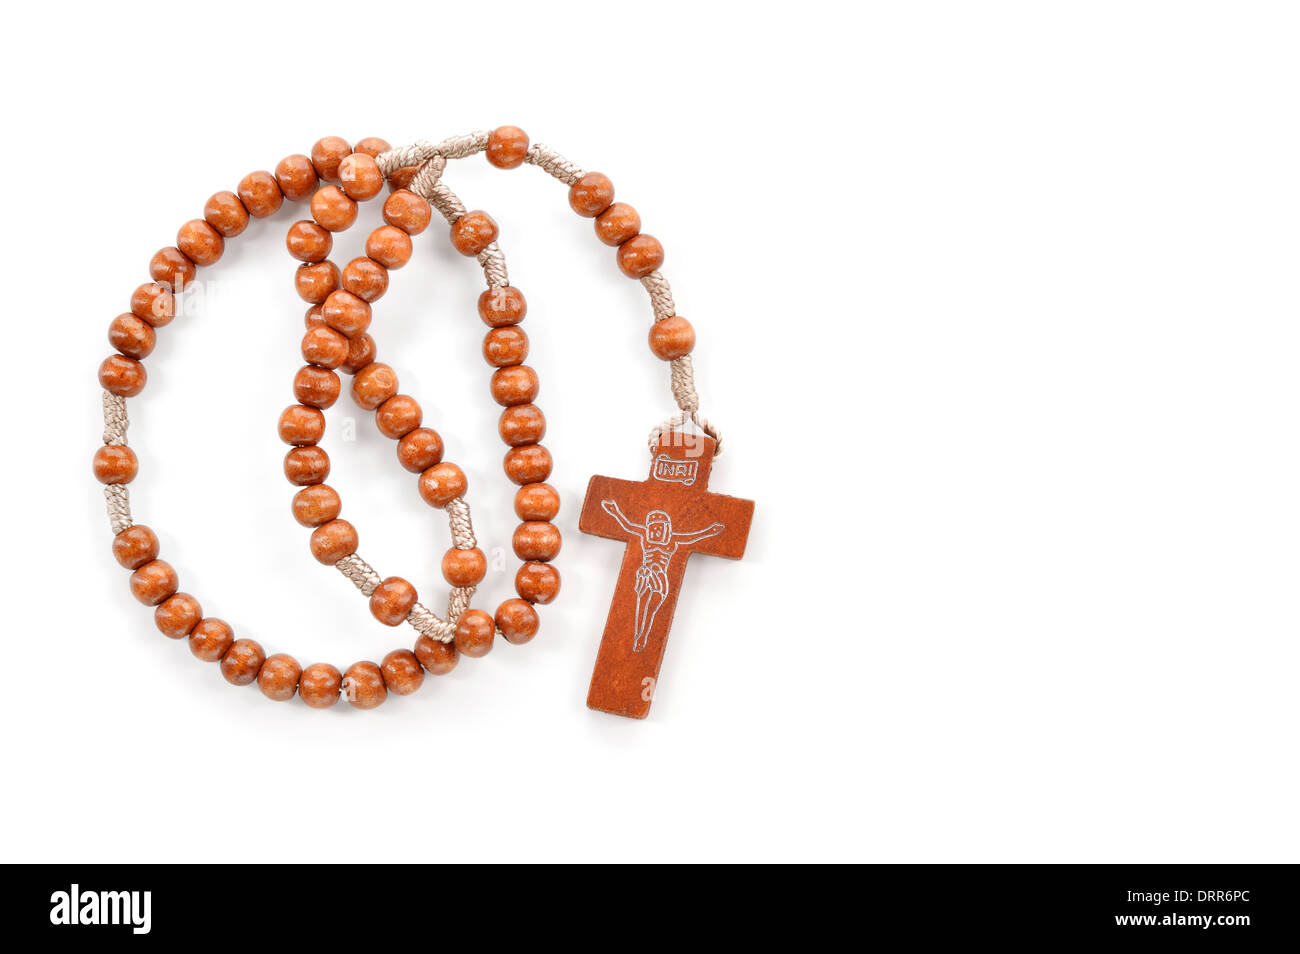 Wooden plain rosary on white background. Prayer beads use to count the repetitions of prayers - rosary of Virgin Mary. Stock Photo